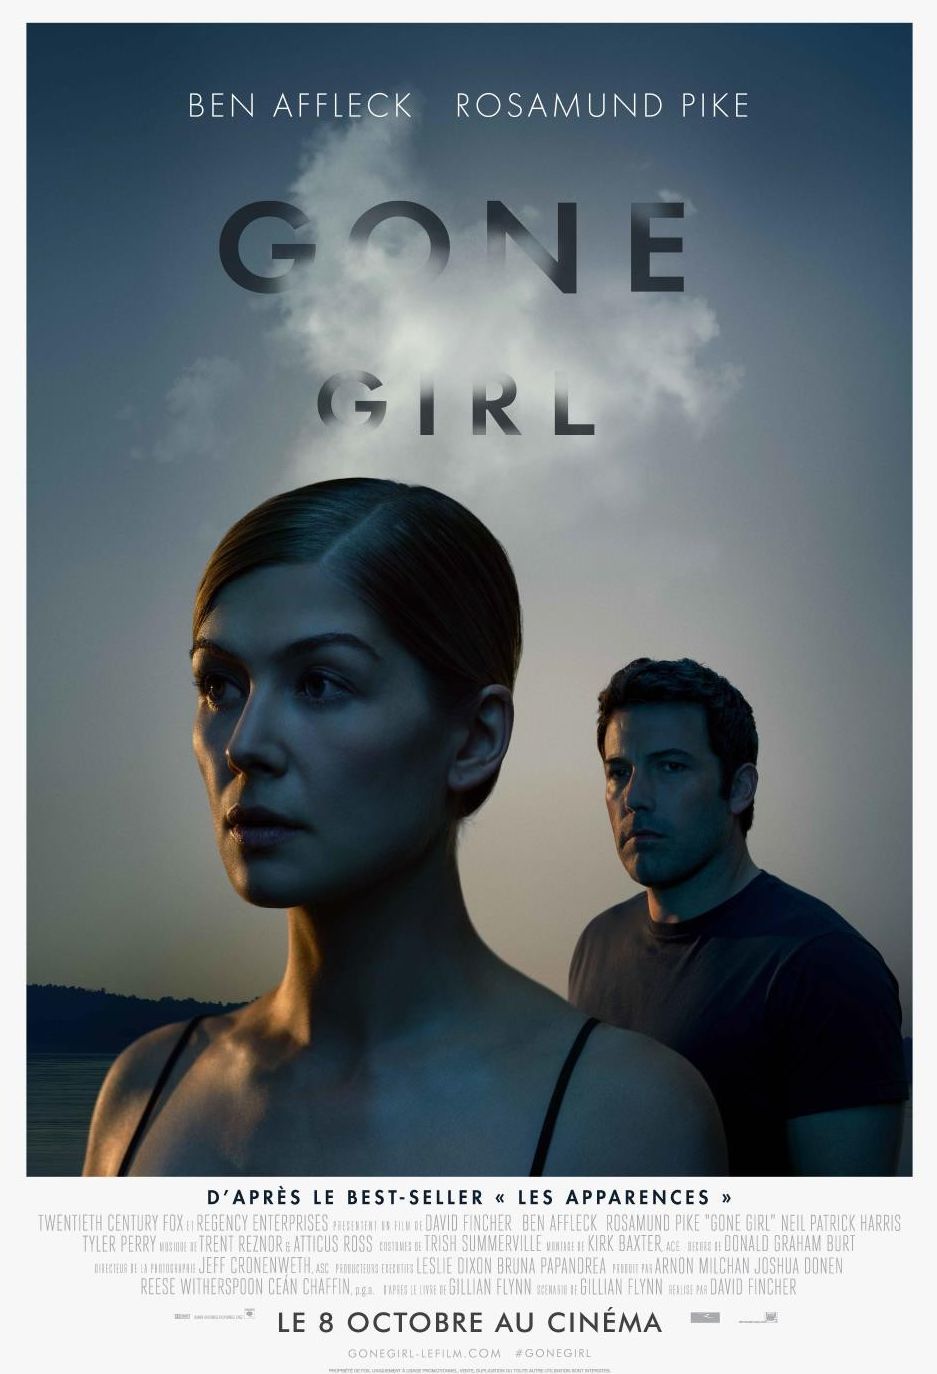 French Gone Girl poster with Rosamund Pike and Ben Affleck